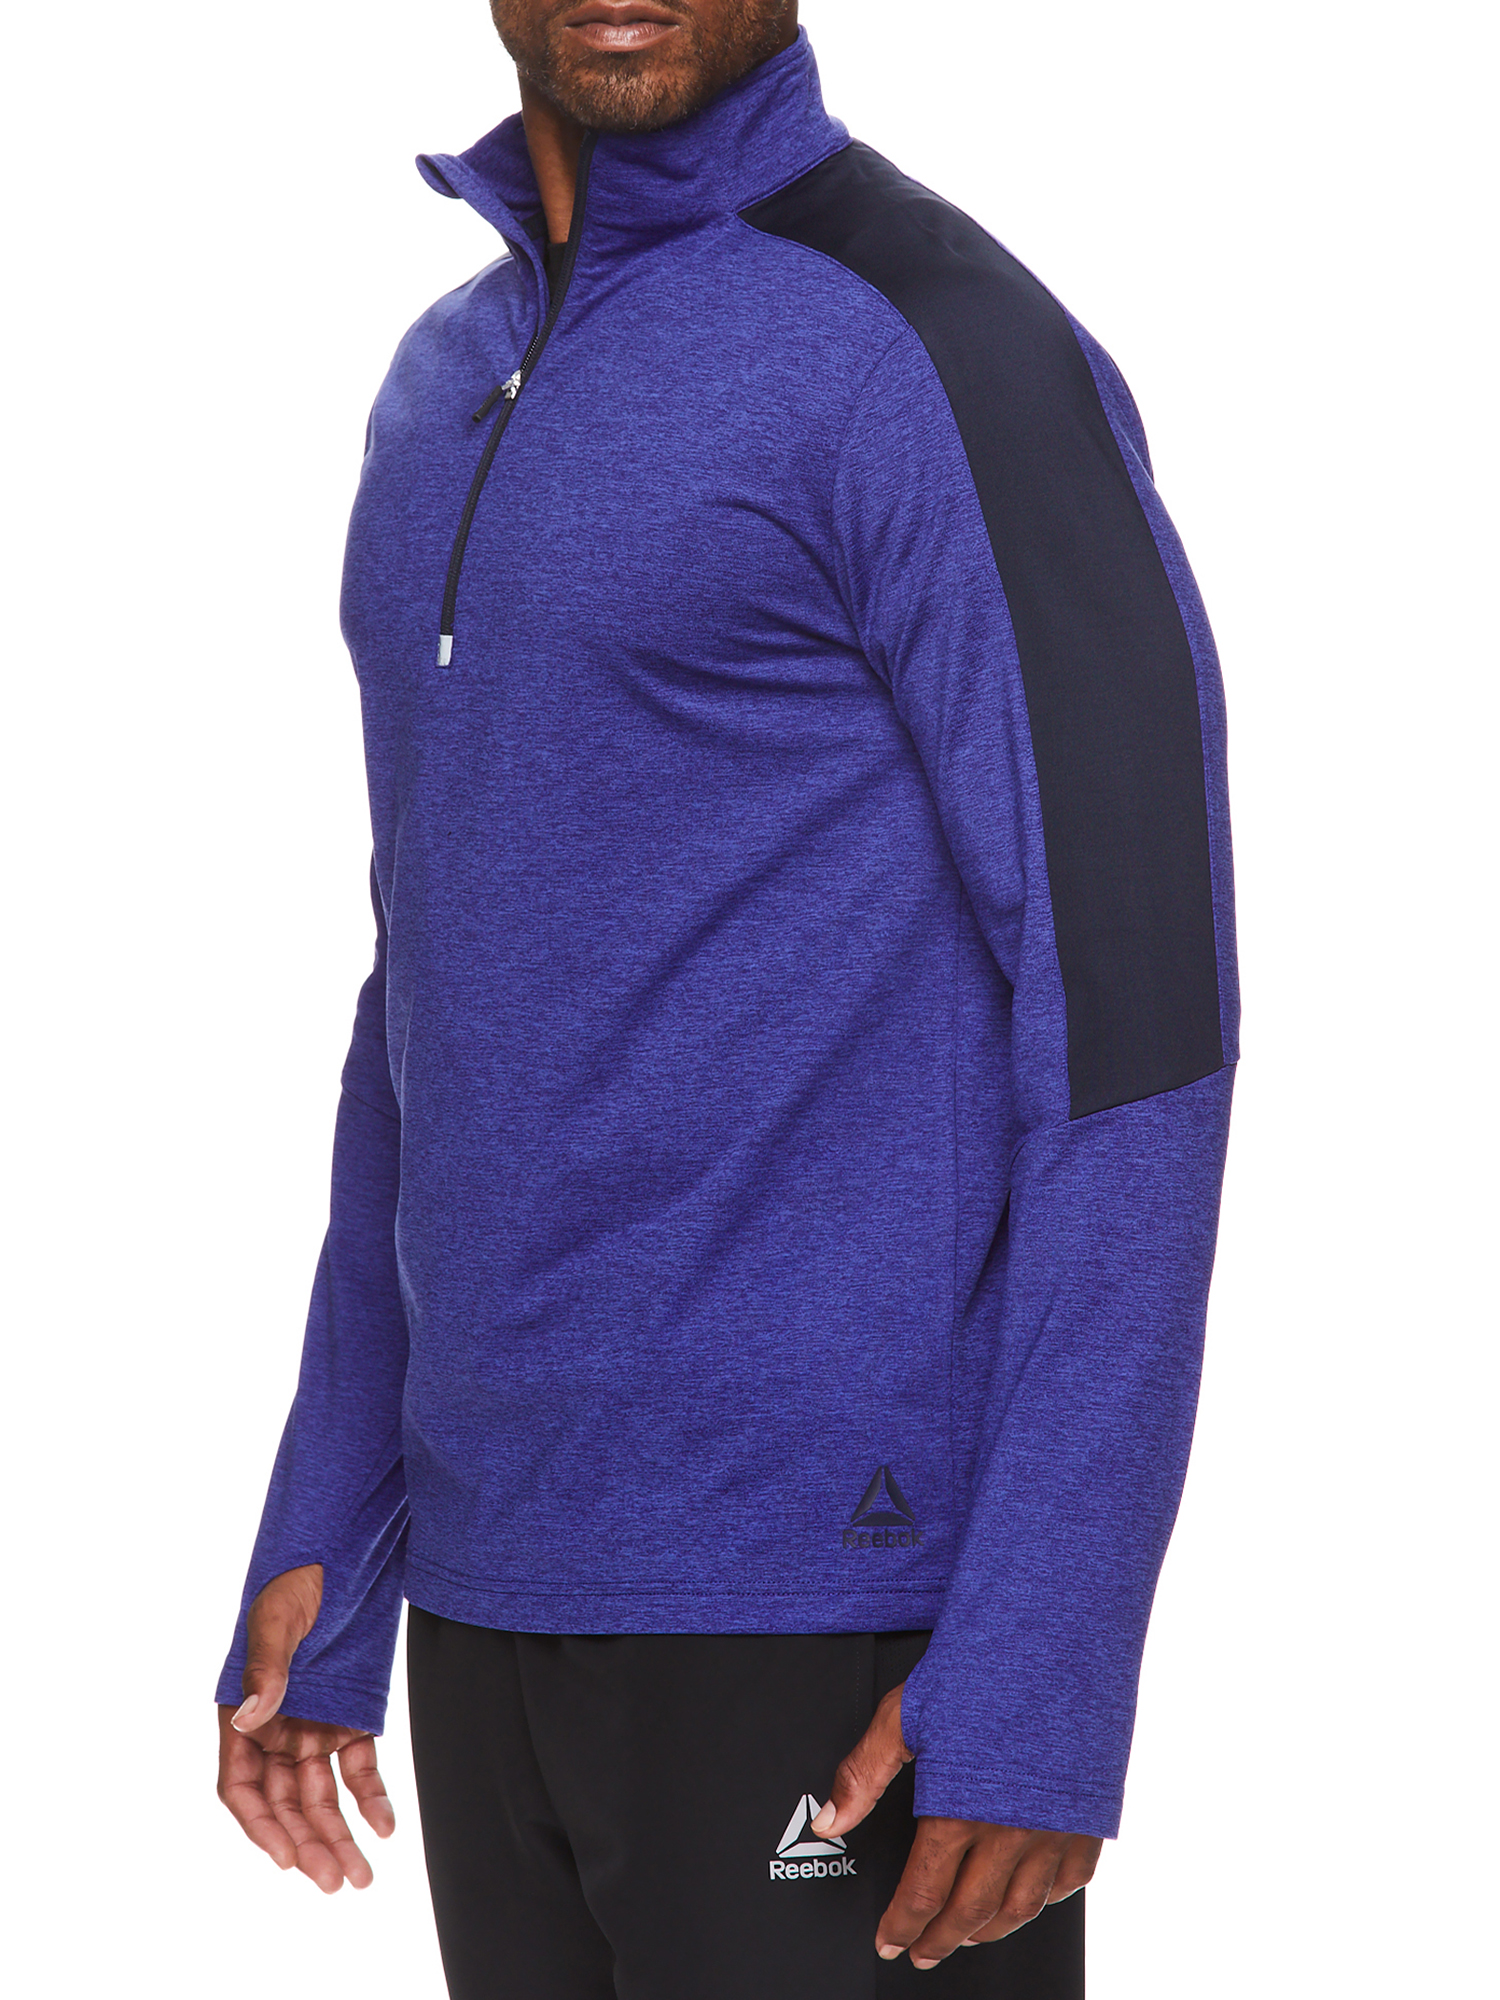 Reebok Men's and Big Men's Active Break-Fast Qtr Zip Mock Pullover, up to Size 3XL - image 3 of 4